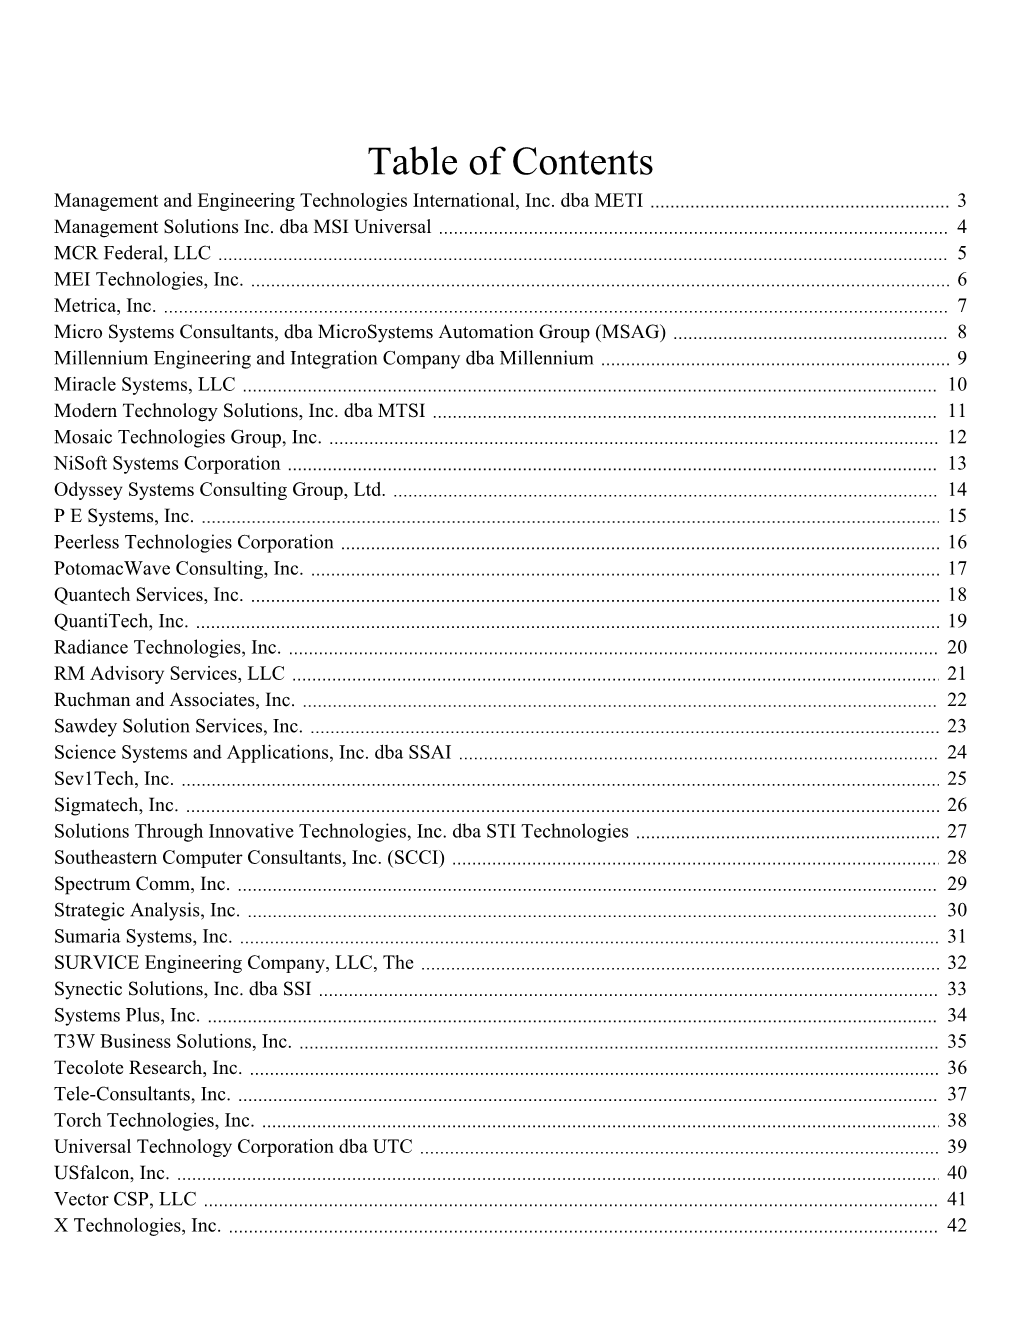 Table of Contents Management and Engineering Technologies International, Inc